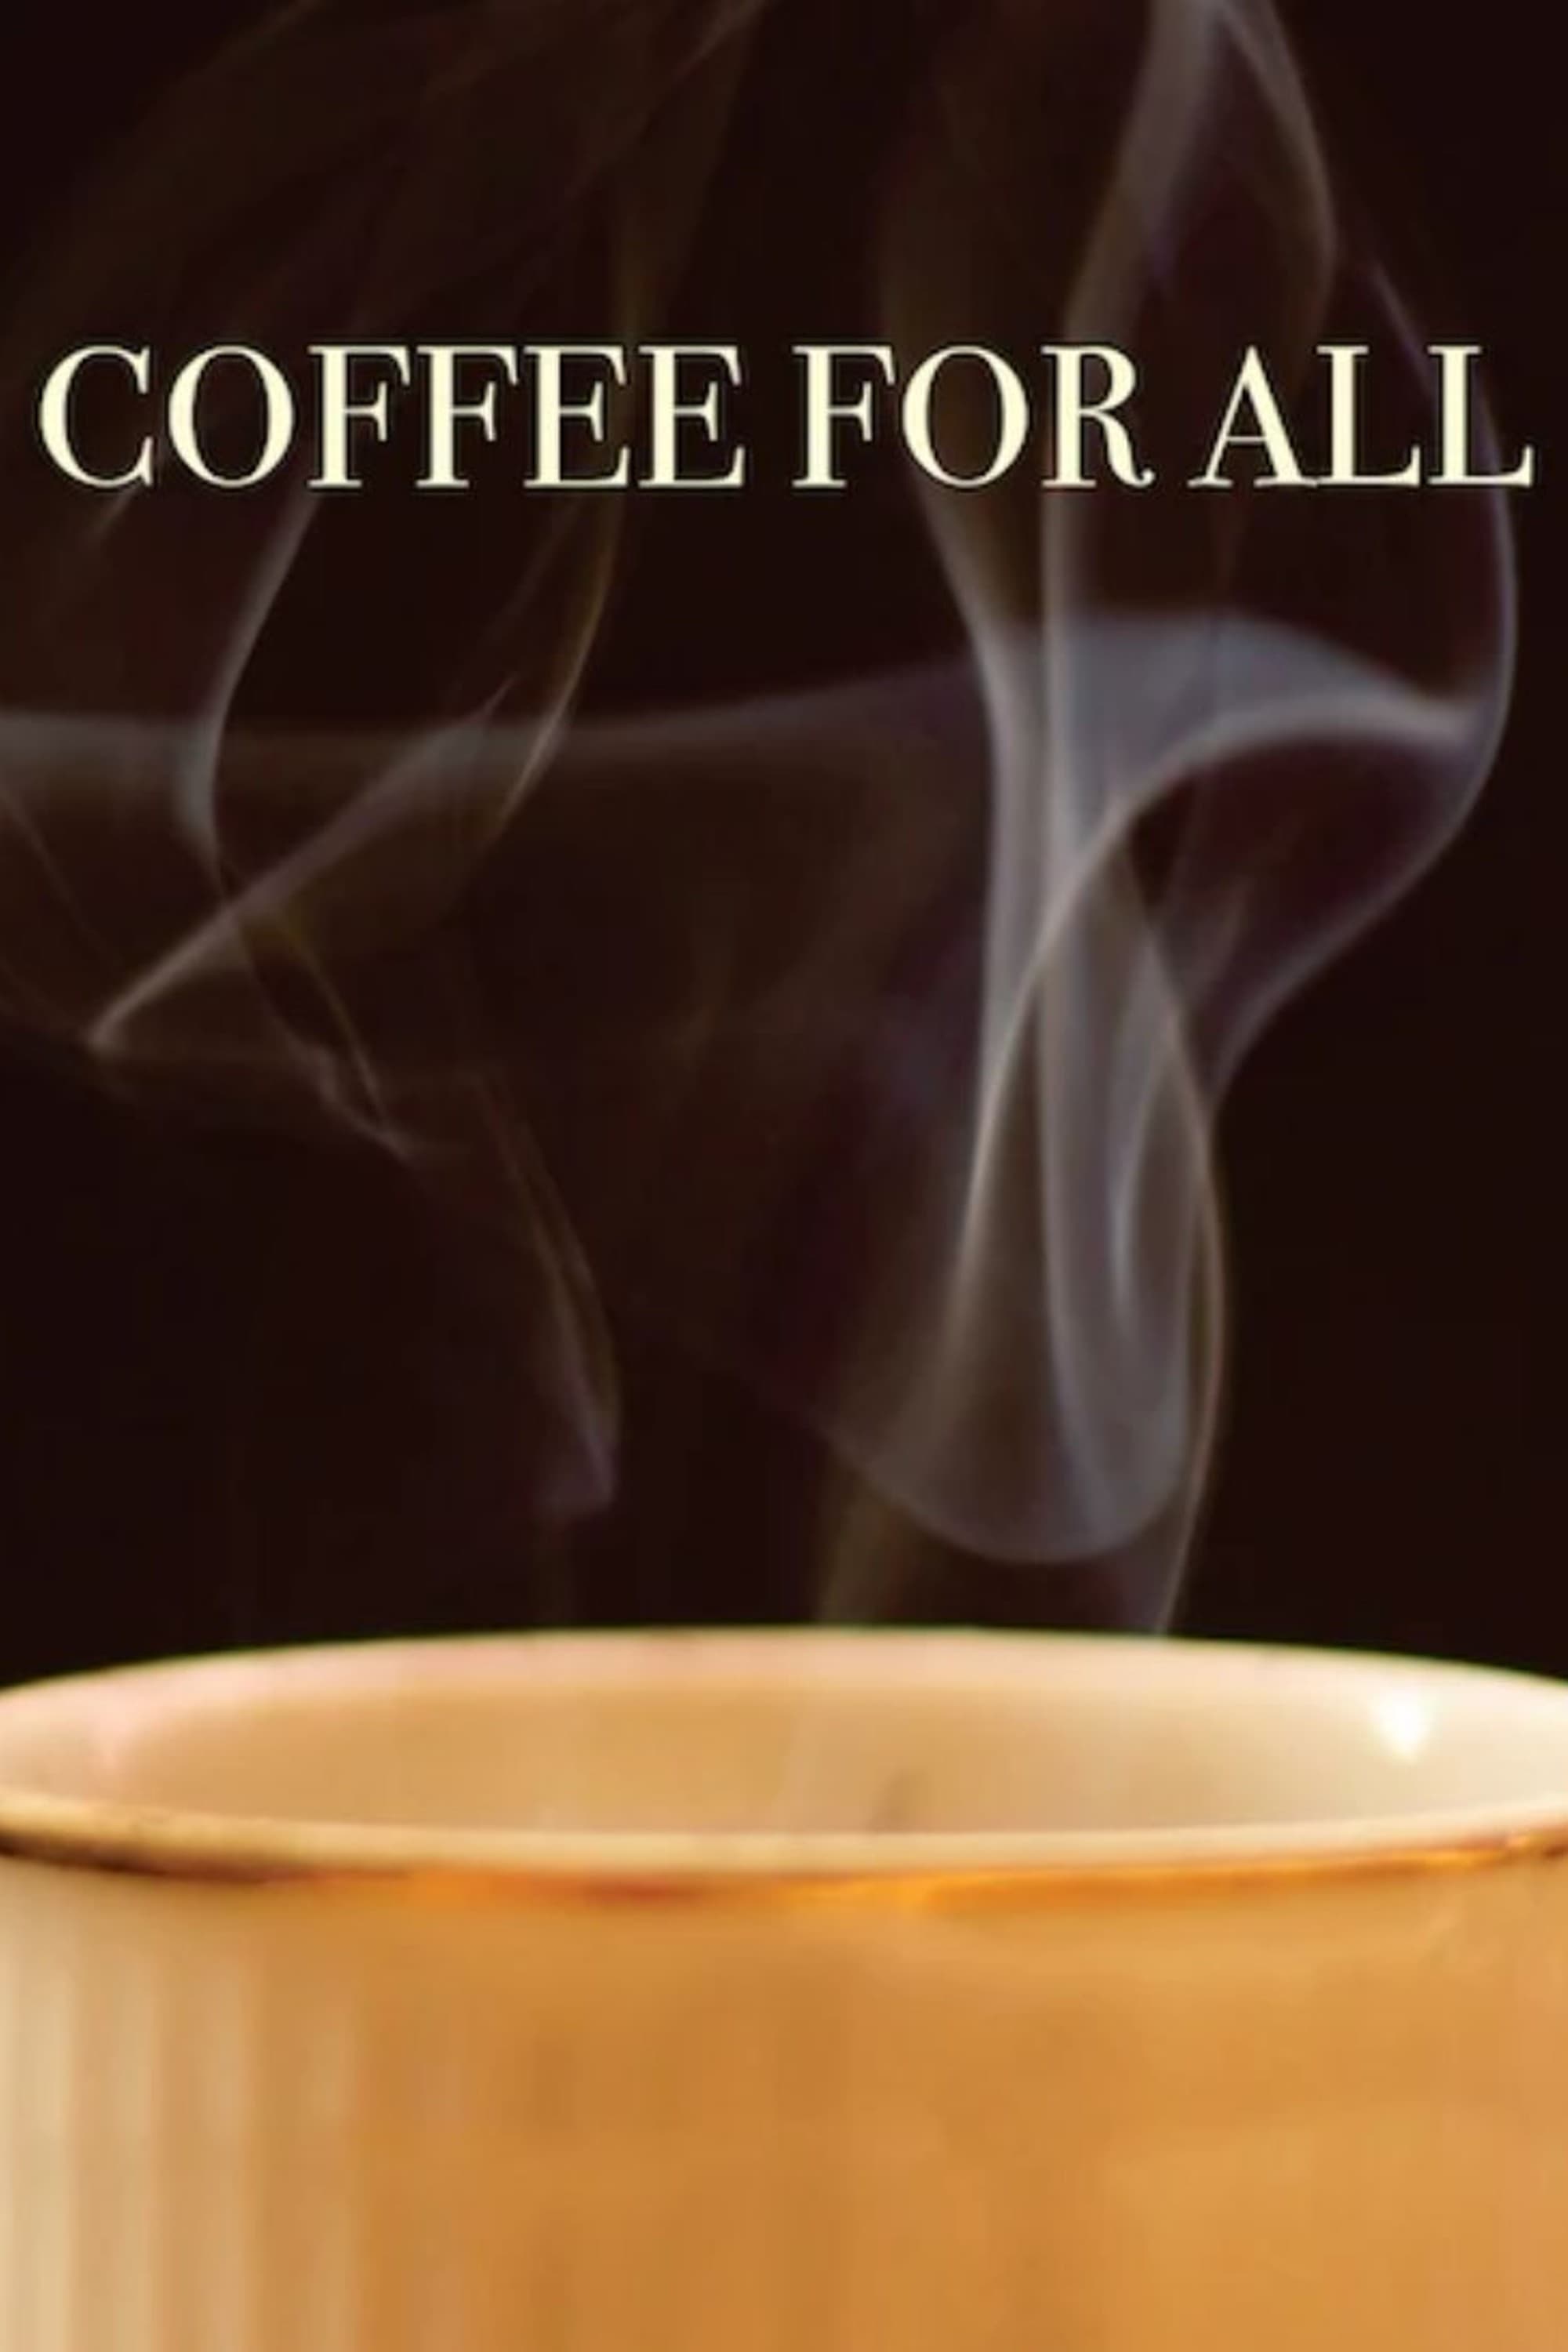 Coffee for All